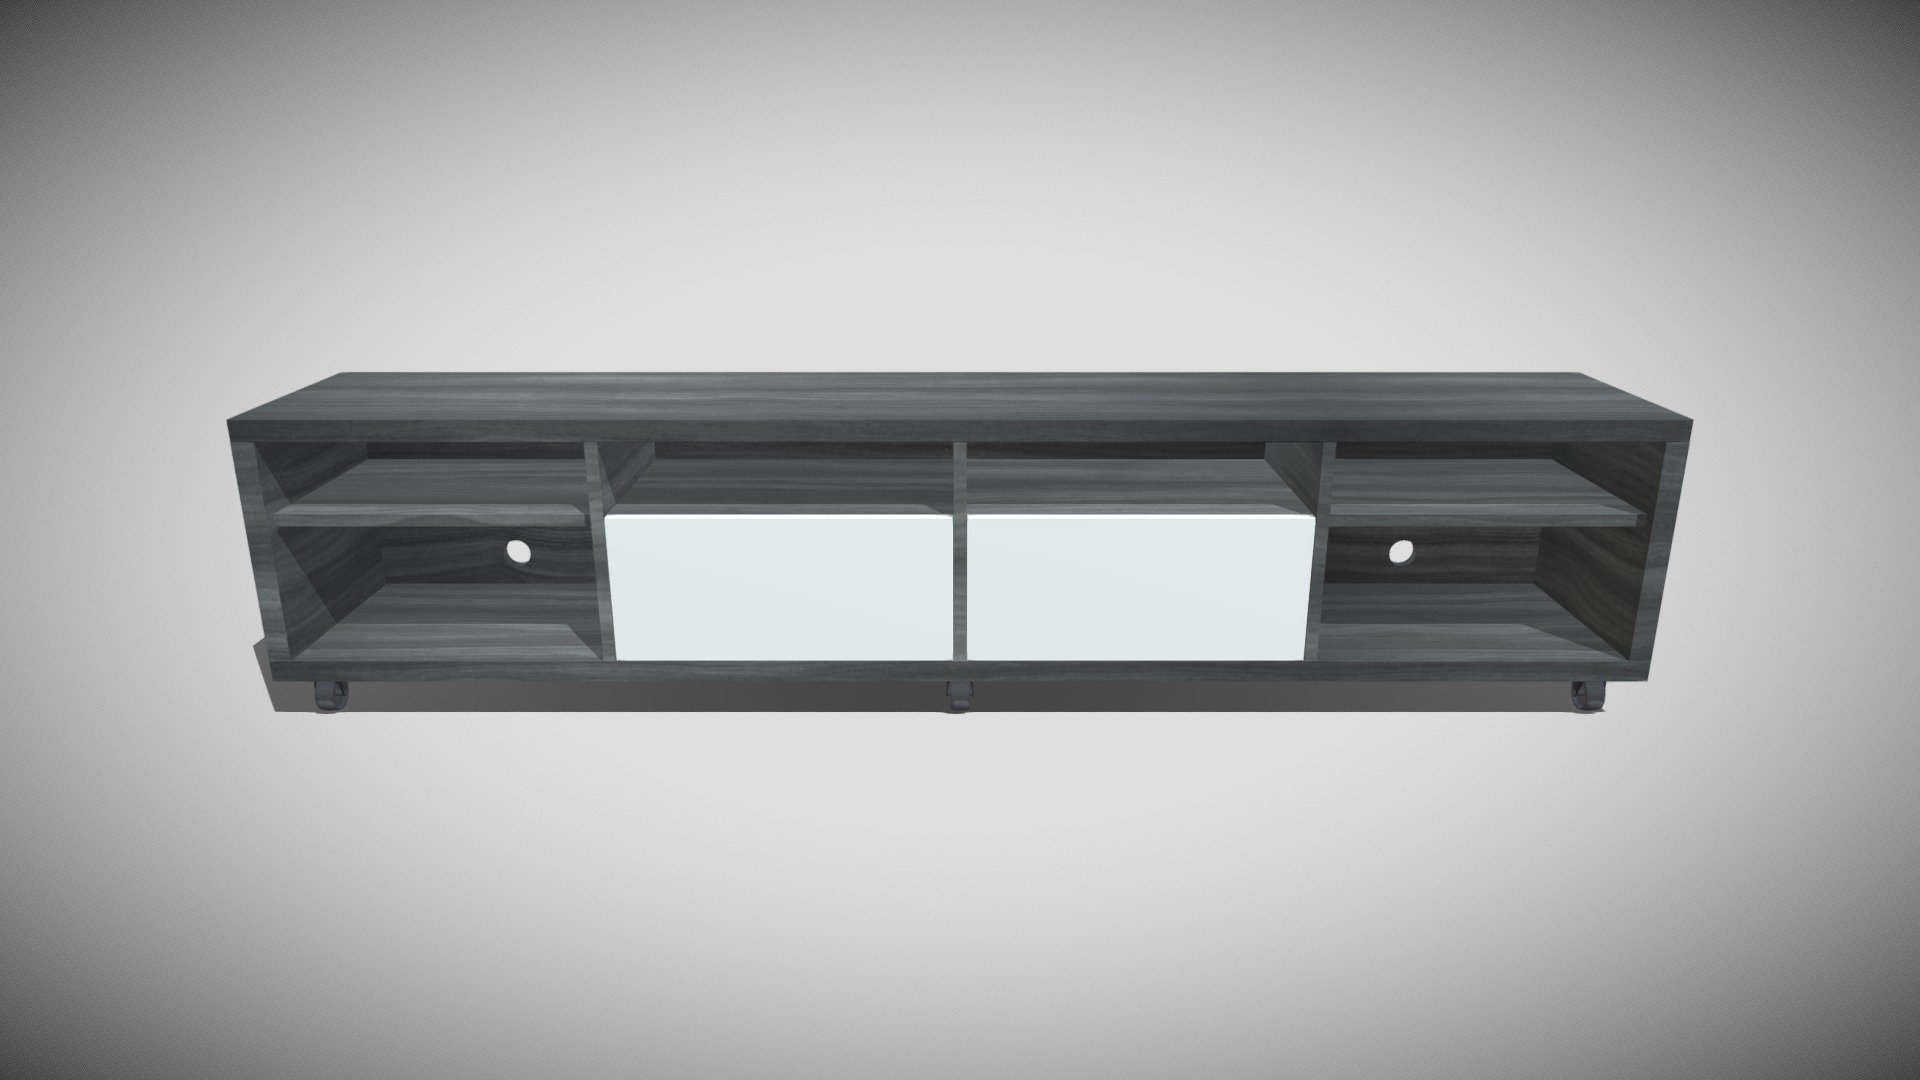 Detailed model of a TV Stand, modeled in Cinema 4D.The model was created using approximate real world dimensions.

The model has 16,056 polys and 15,572 vertices.

An additional file has been provided containing the original Cinema 4D project files, textures and other 3d export files such as 3ds, fbx and obj 3d model